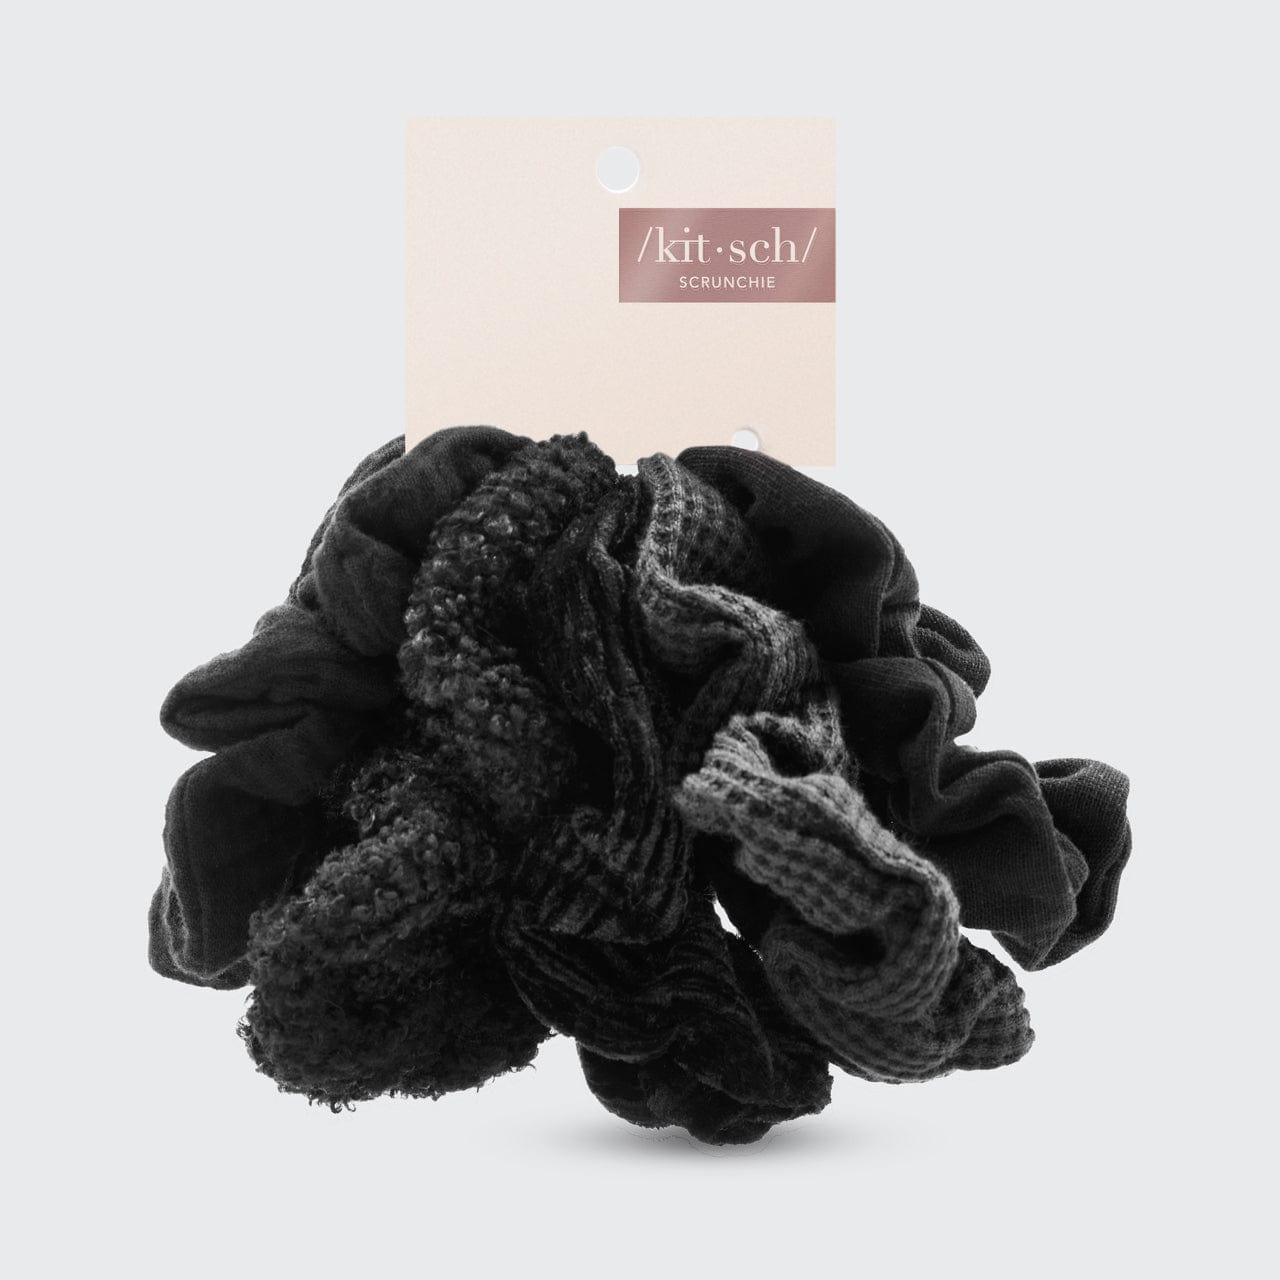 Assorted Textured Scrunchies 5pc - Black by KITSCH